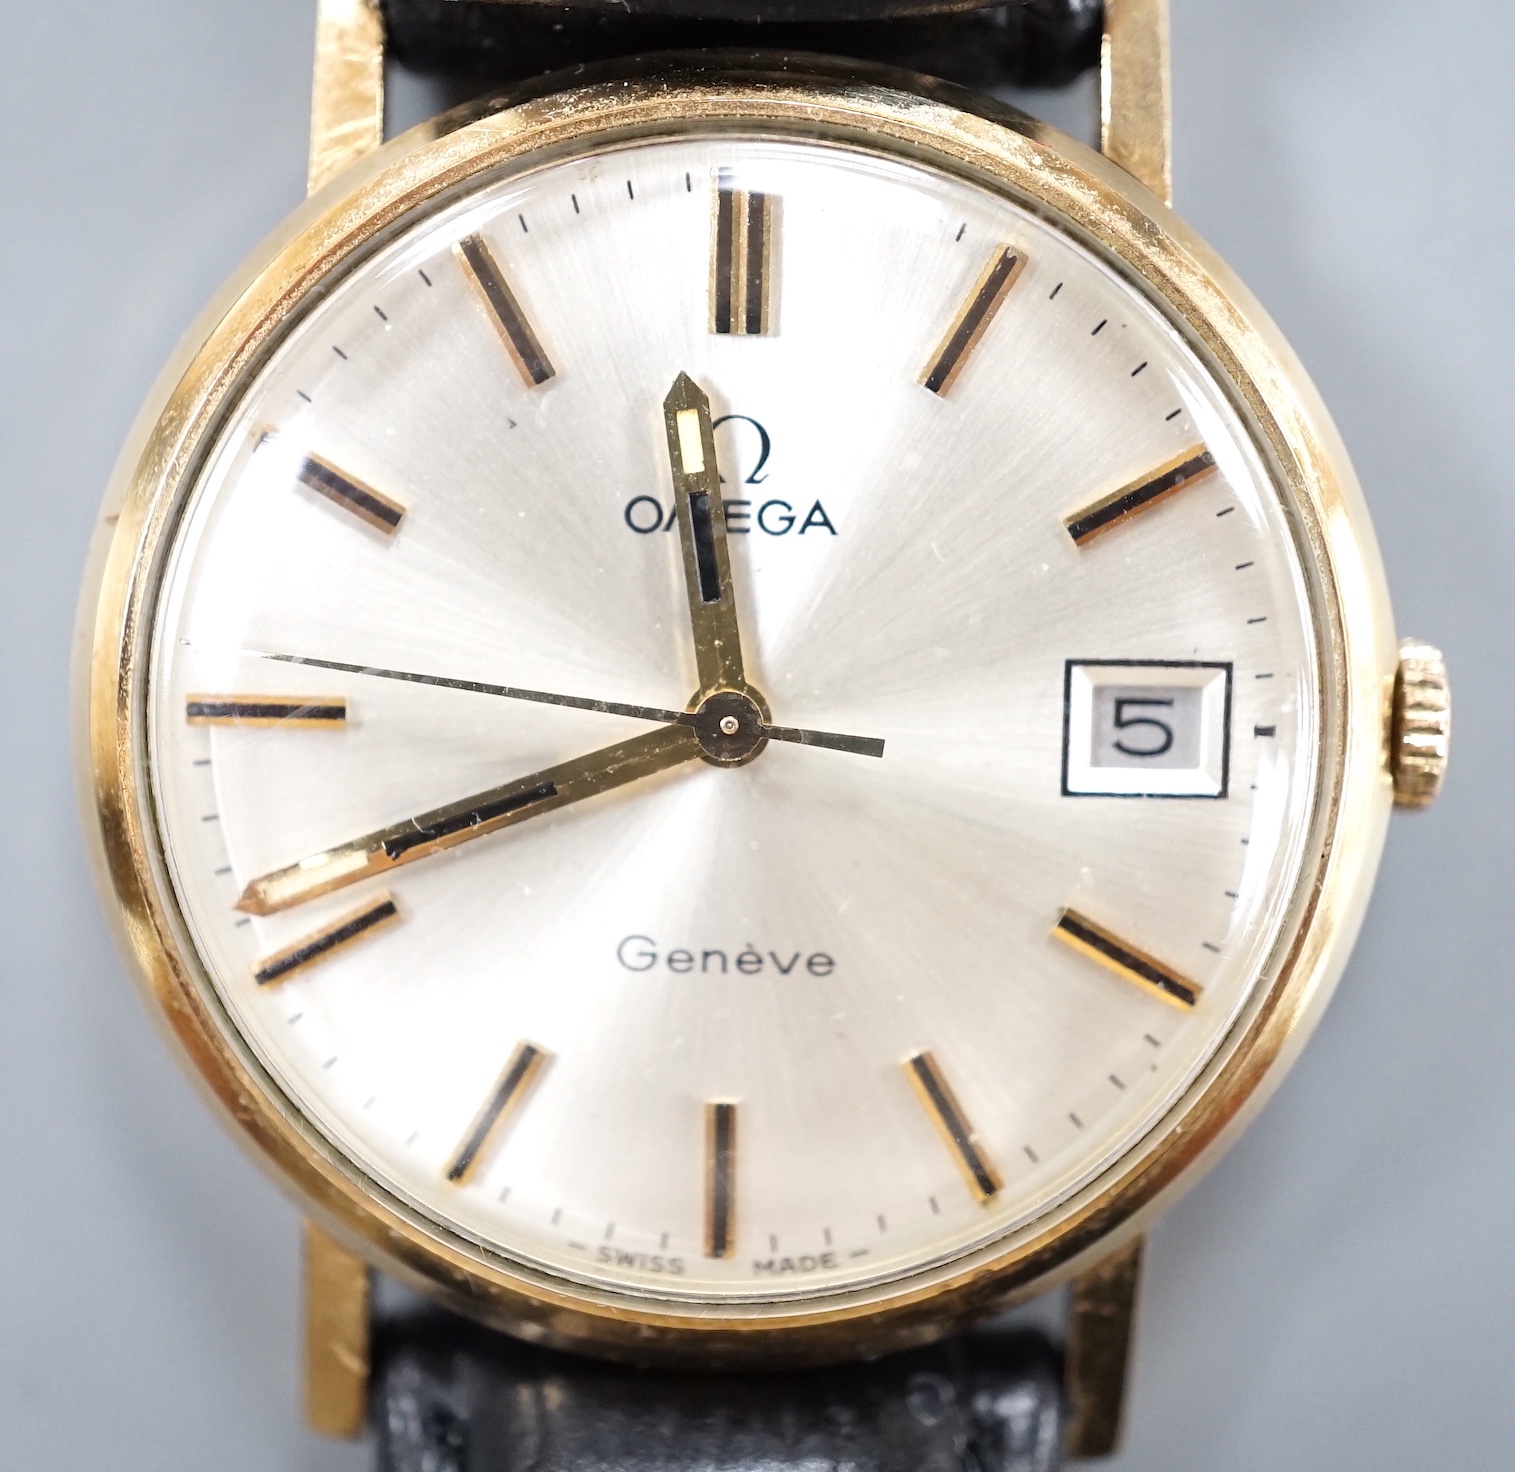 A gentleman's 9ct gold Omega manual wind wrist watch, with date aperture, on a black leather Omega strap with Omega buckle, cased diameter 33mm